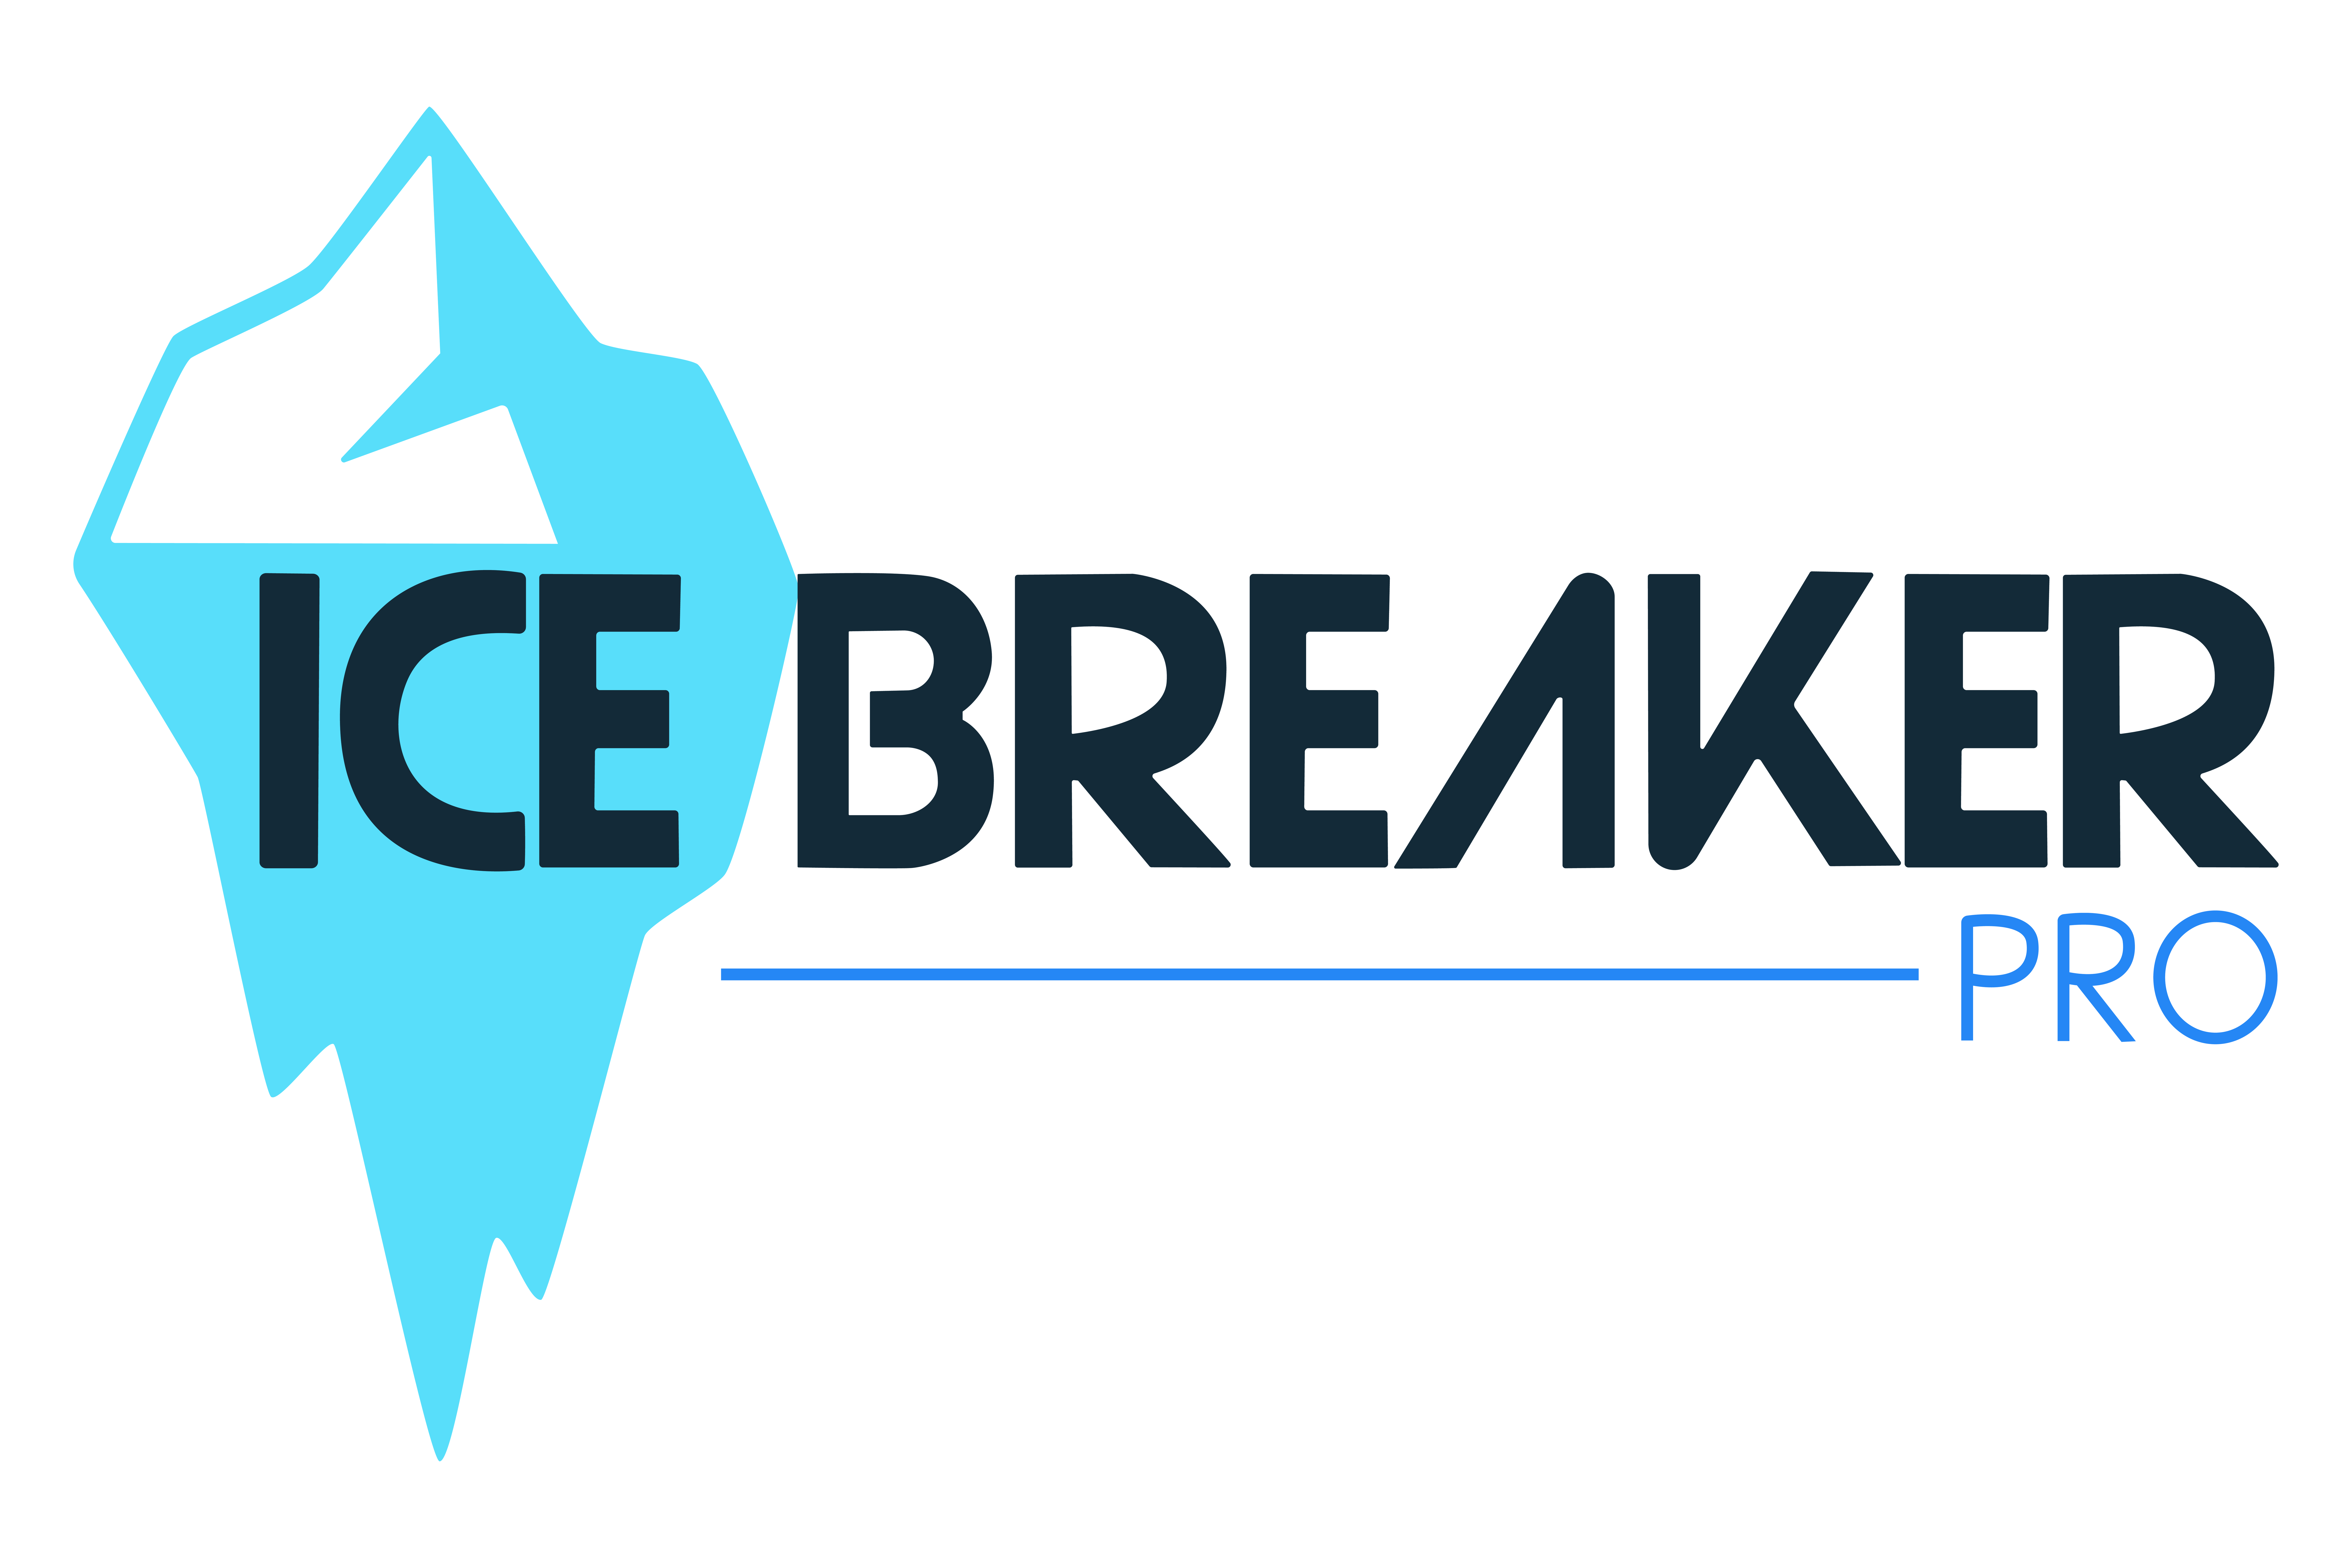 IceBreaker Pro Hopes to Raise $10,000 to Bring Cool Cocktails to Consumer Market